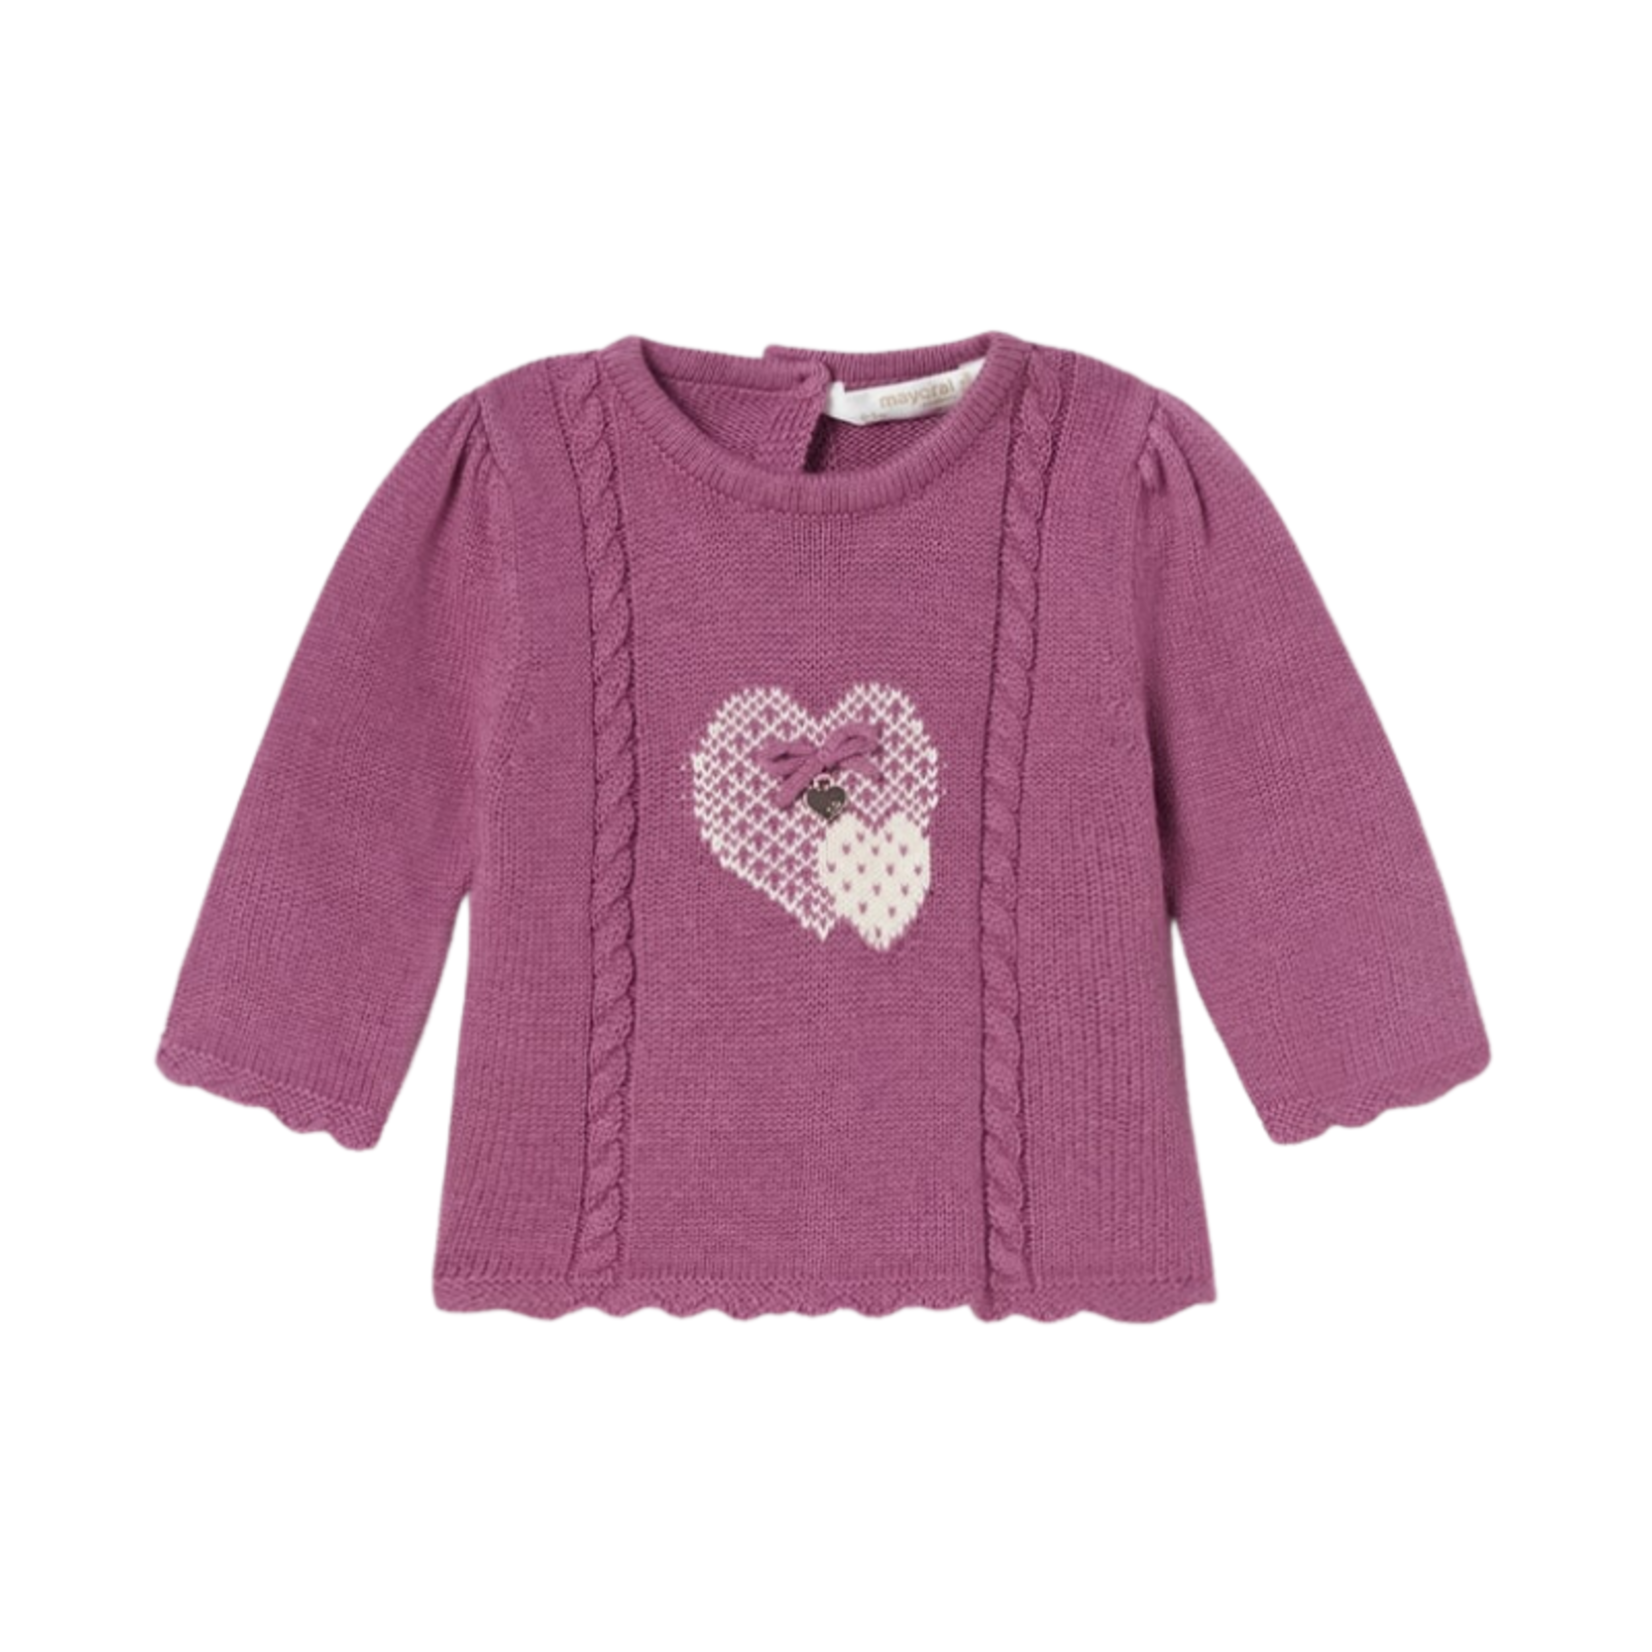 Mayoral Mayoral Knit Sweater Heart Eggplant